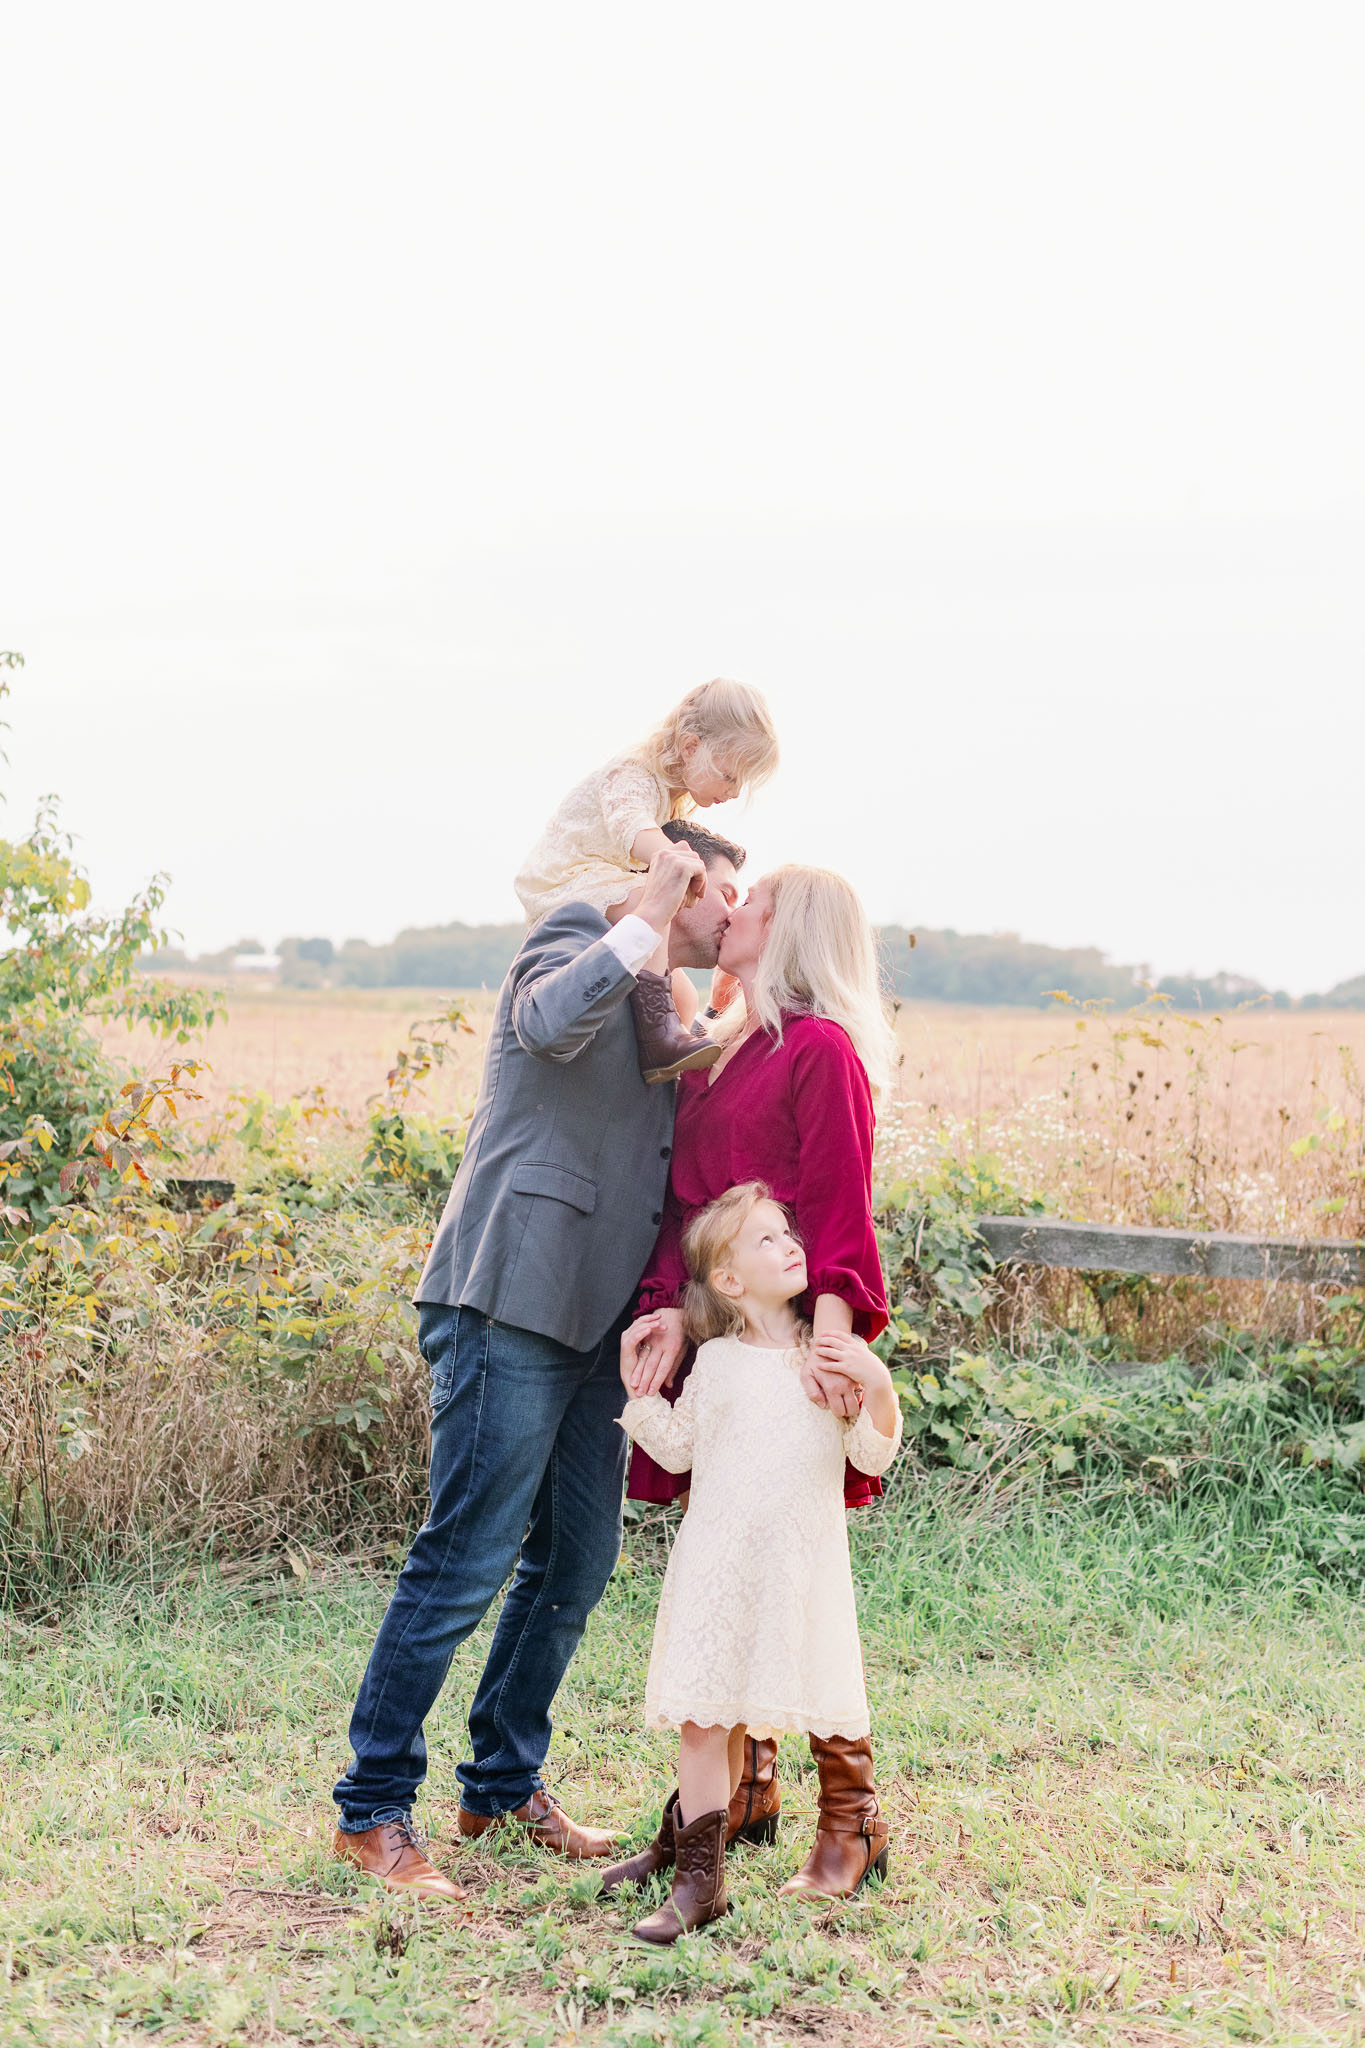 Chicago Lifestyle Family Photographer – St Charles Fall Family Photos-34